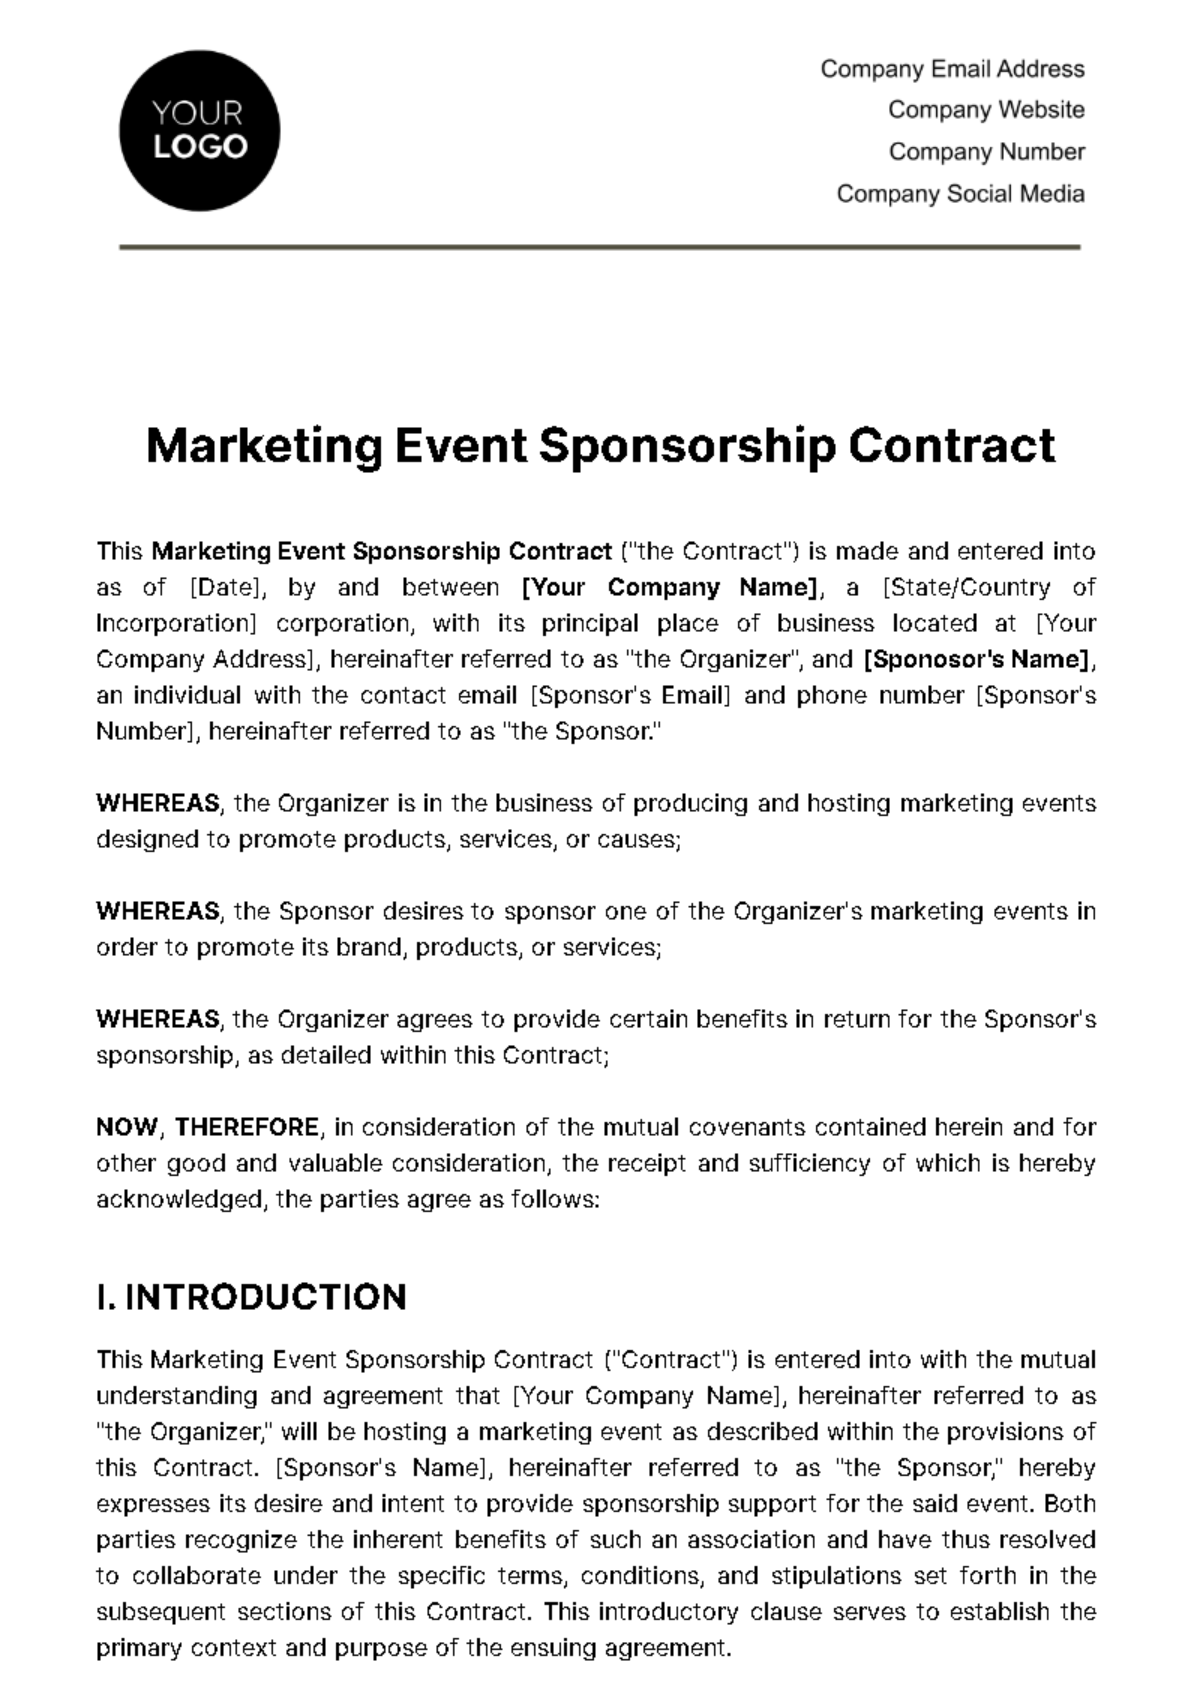 Free Marketing Event Sponsorship Contract Template